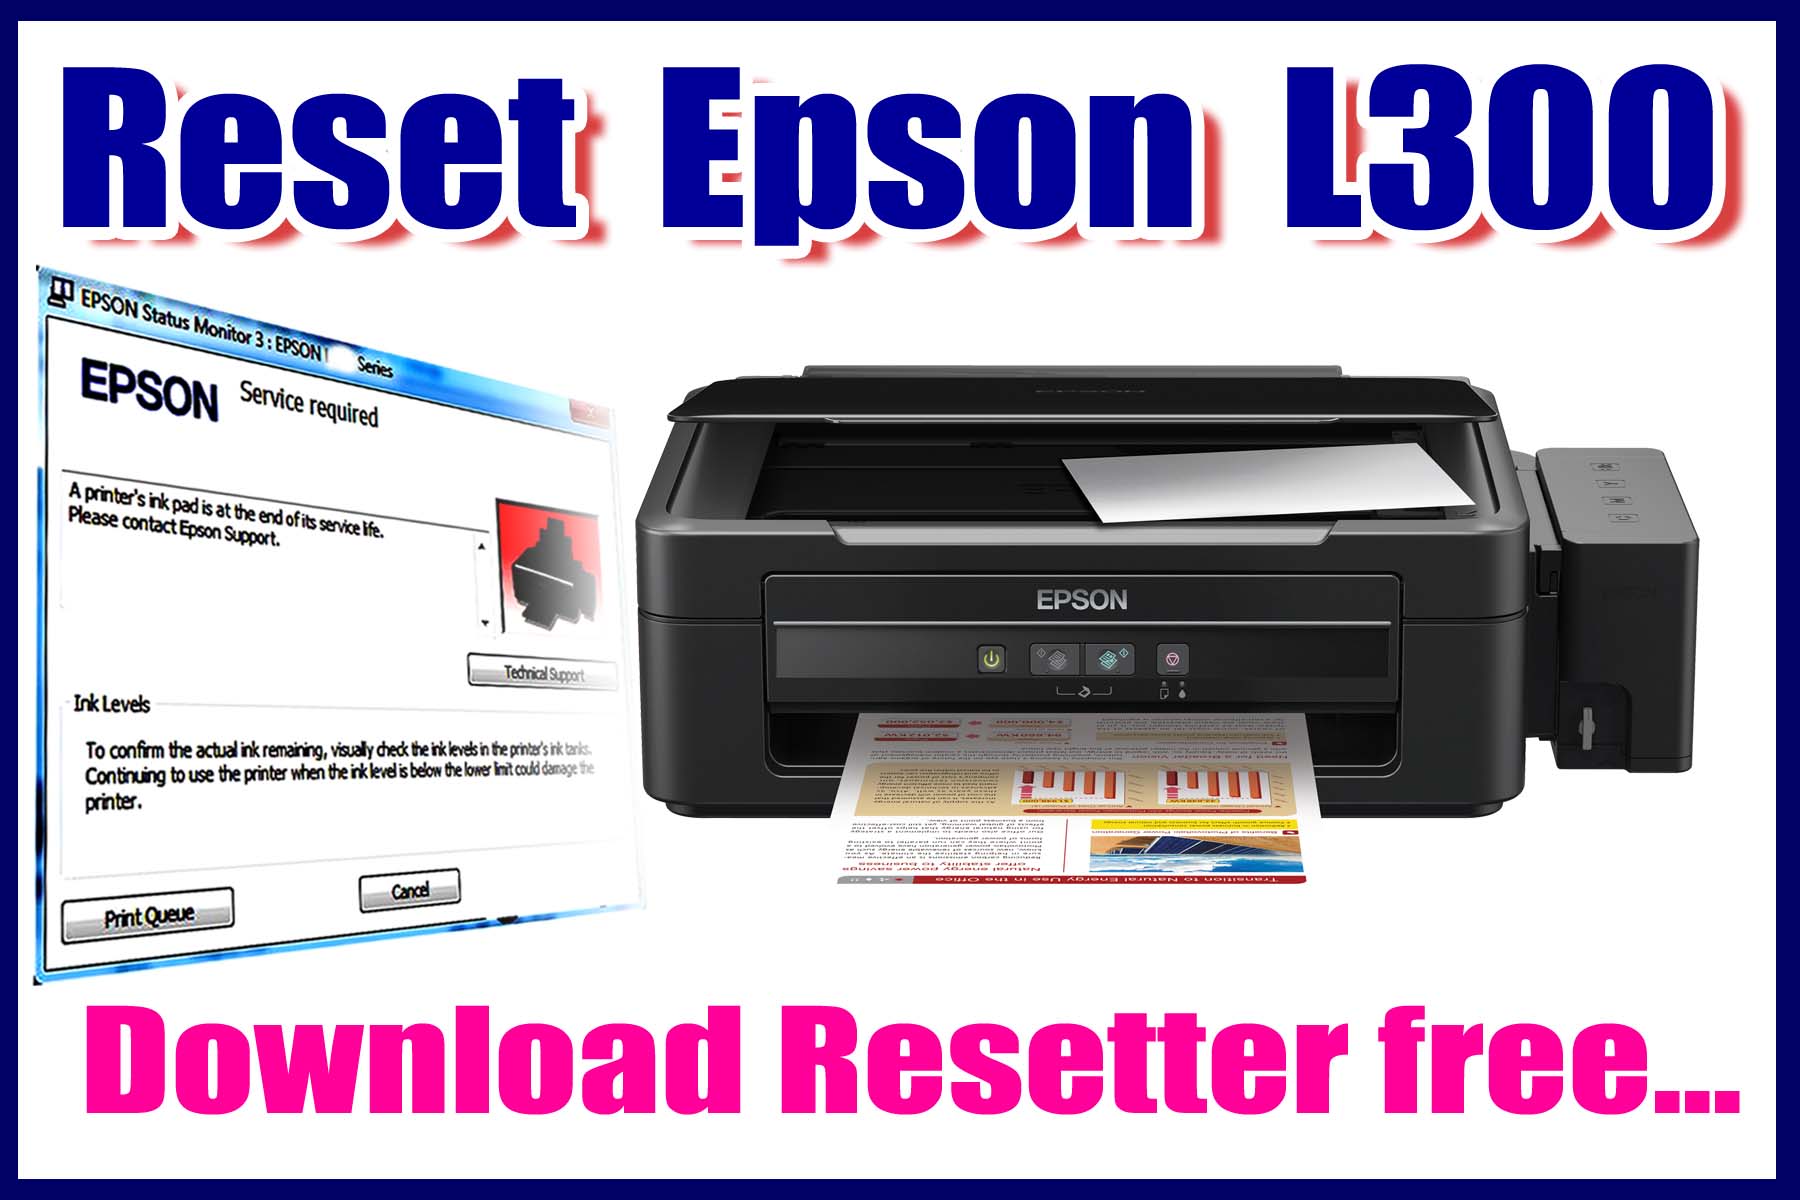 Epson L3200 Resetter Download: Efficient and Reliable Solution for Resetting Epson L3200 Printer